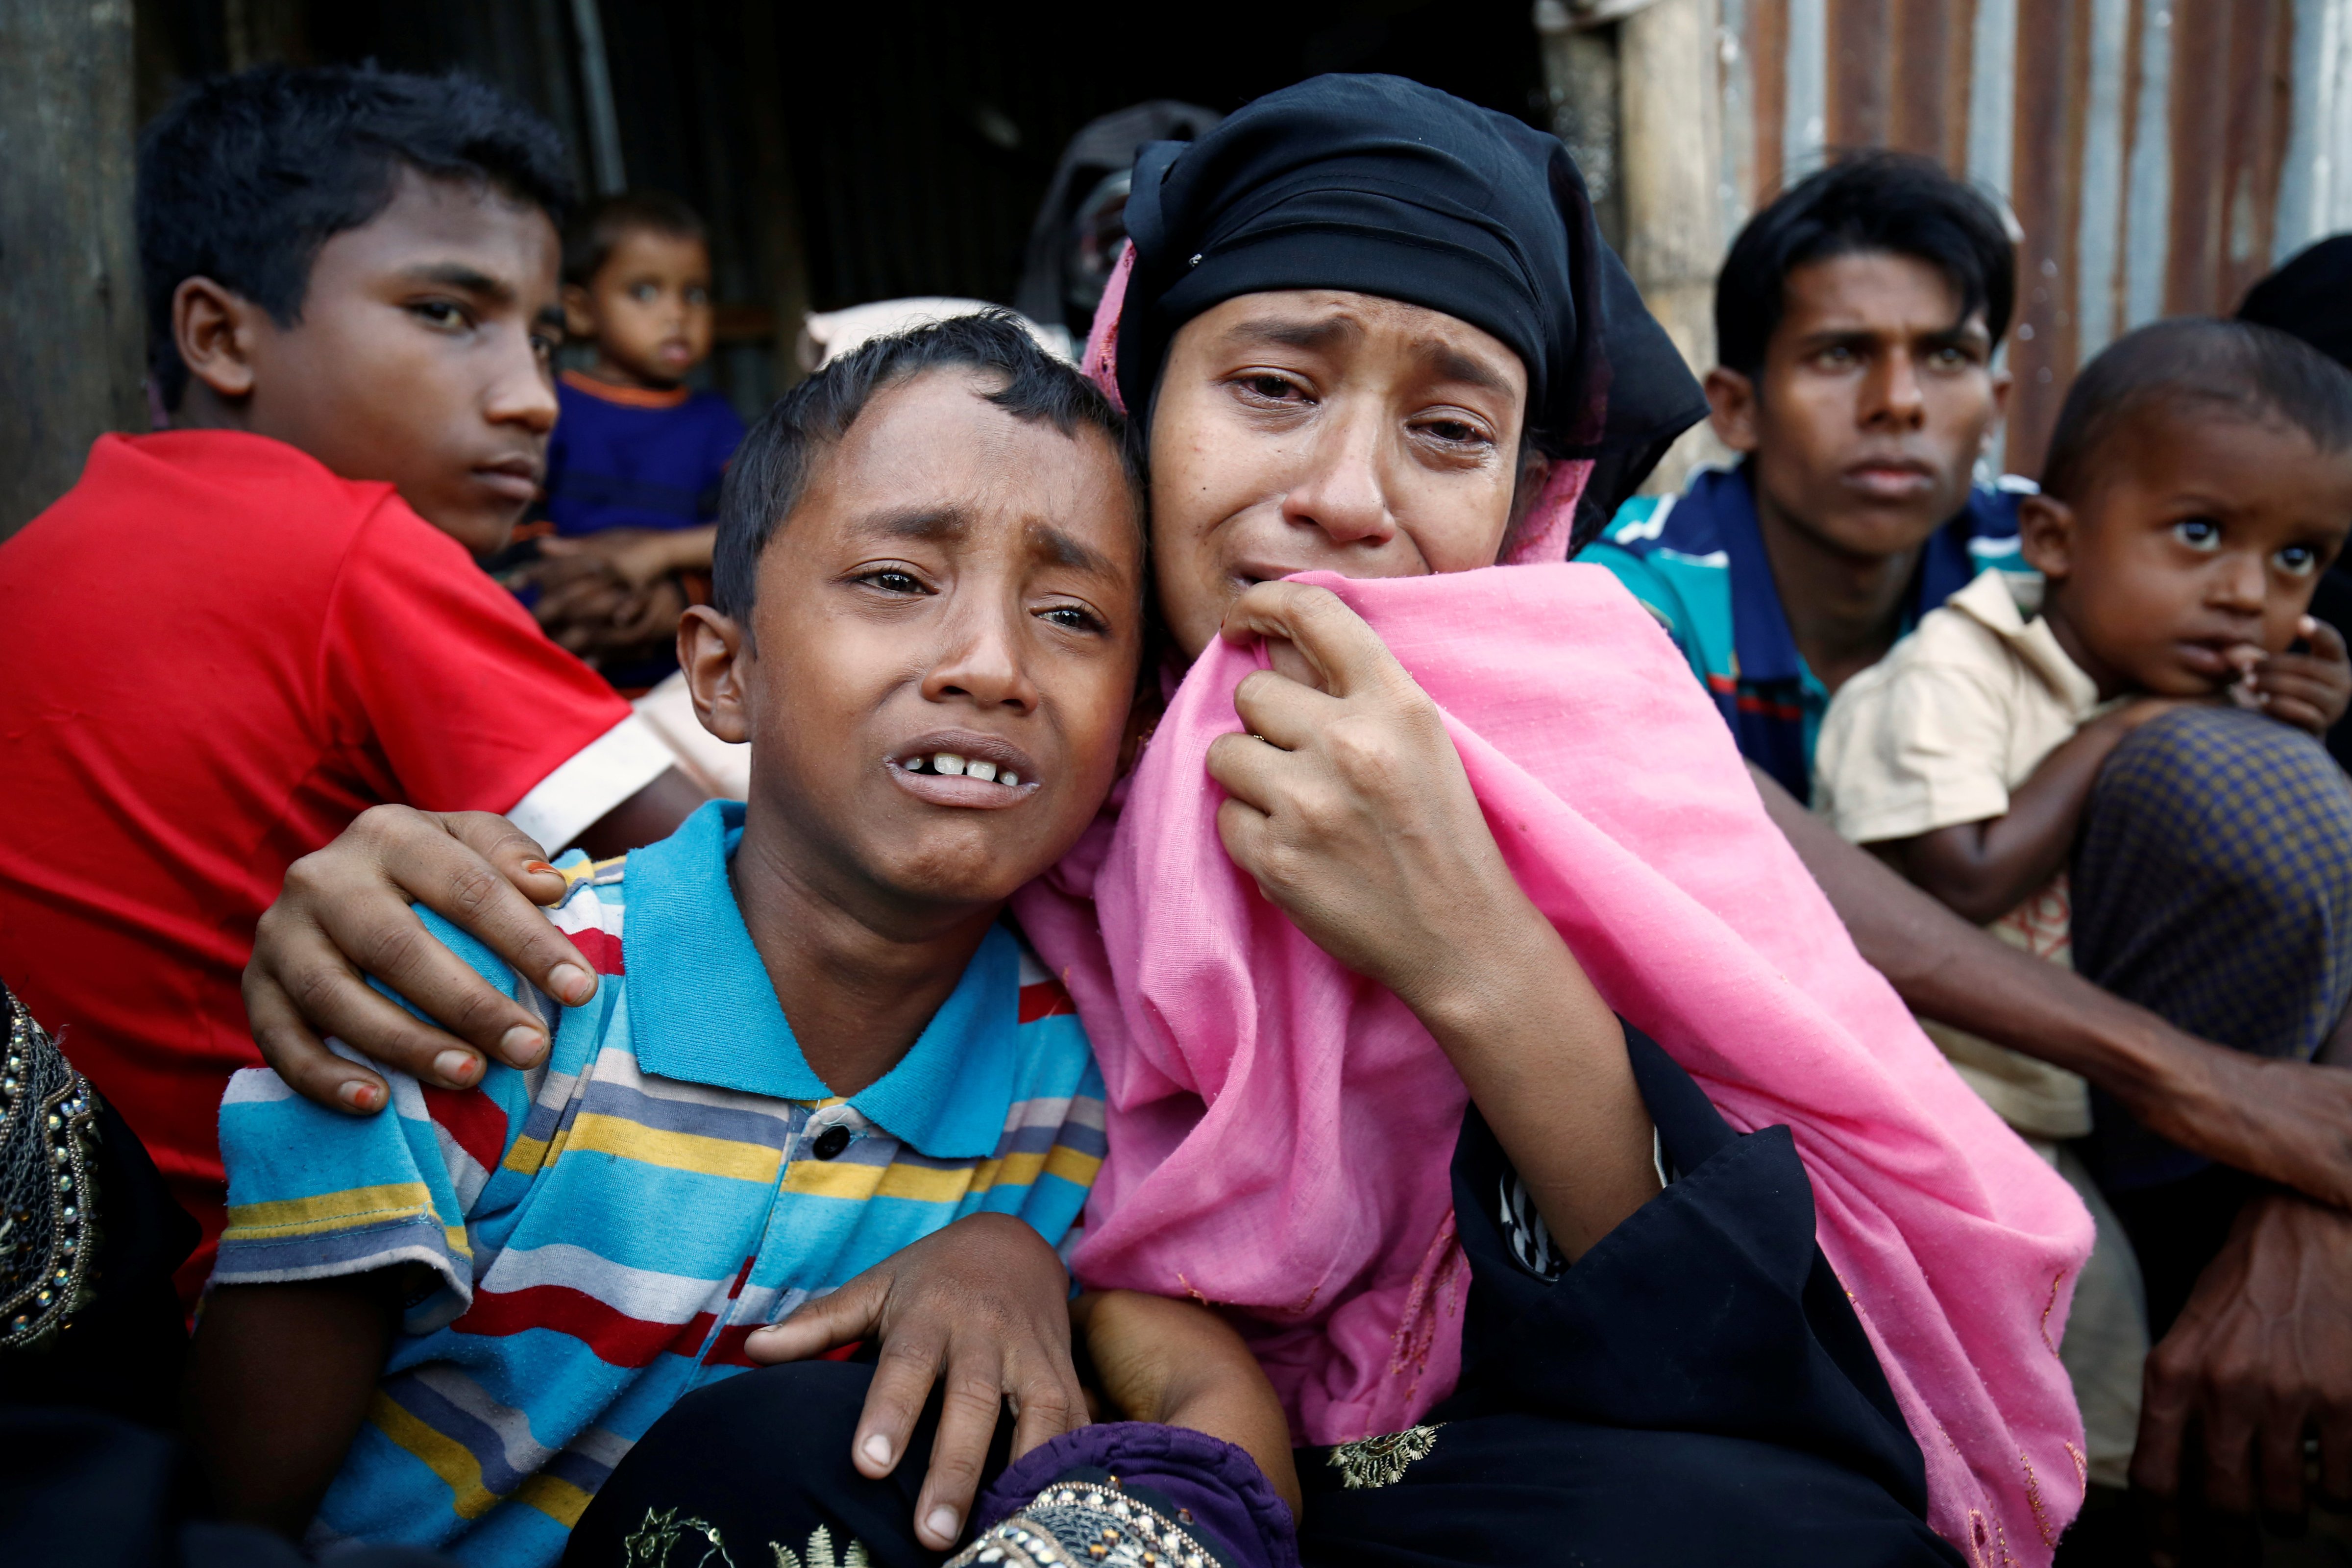 A Rohingya Muslim woman and her son cry after being caught by Border Guard Bangladesh (BGB) while illegally crossing at a border check point in Cox's Bazar, Bangladesh, on Nov. 21, 2016 (Mohammad Ponir Hossain—REUTERS)